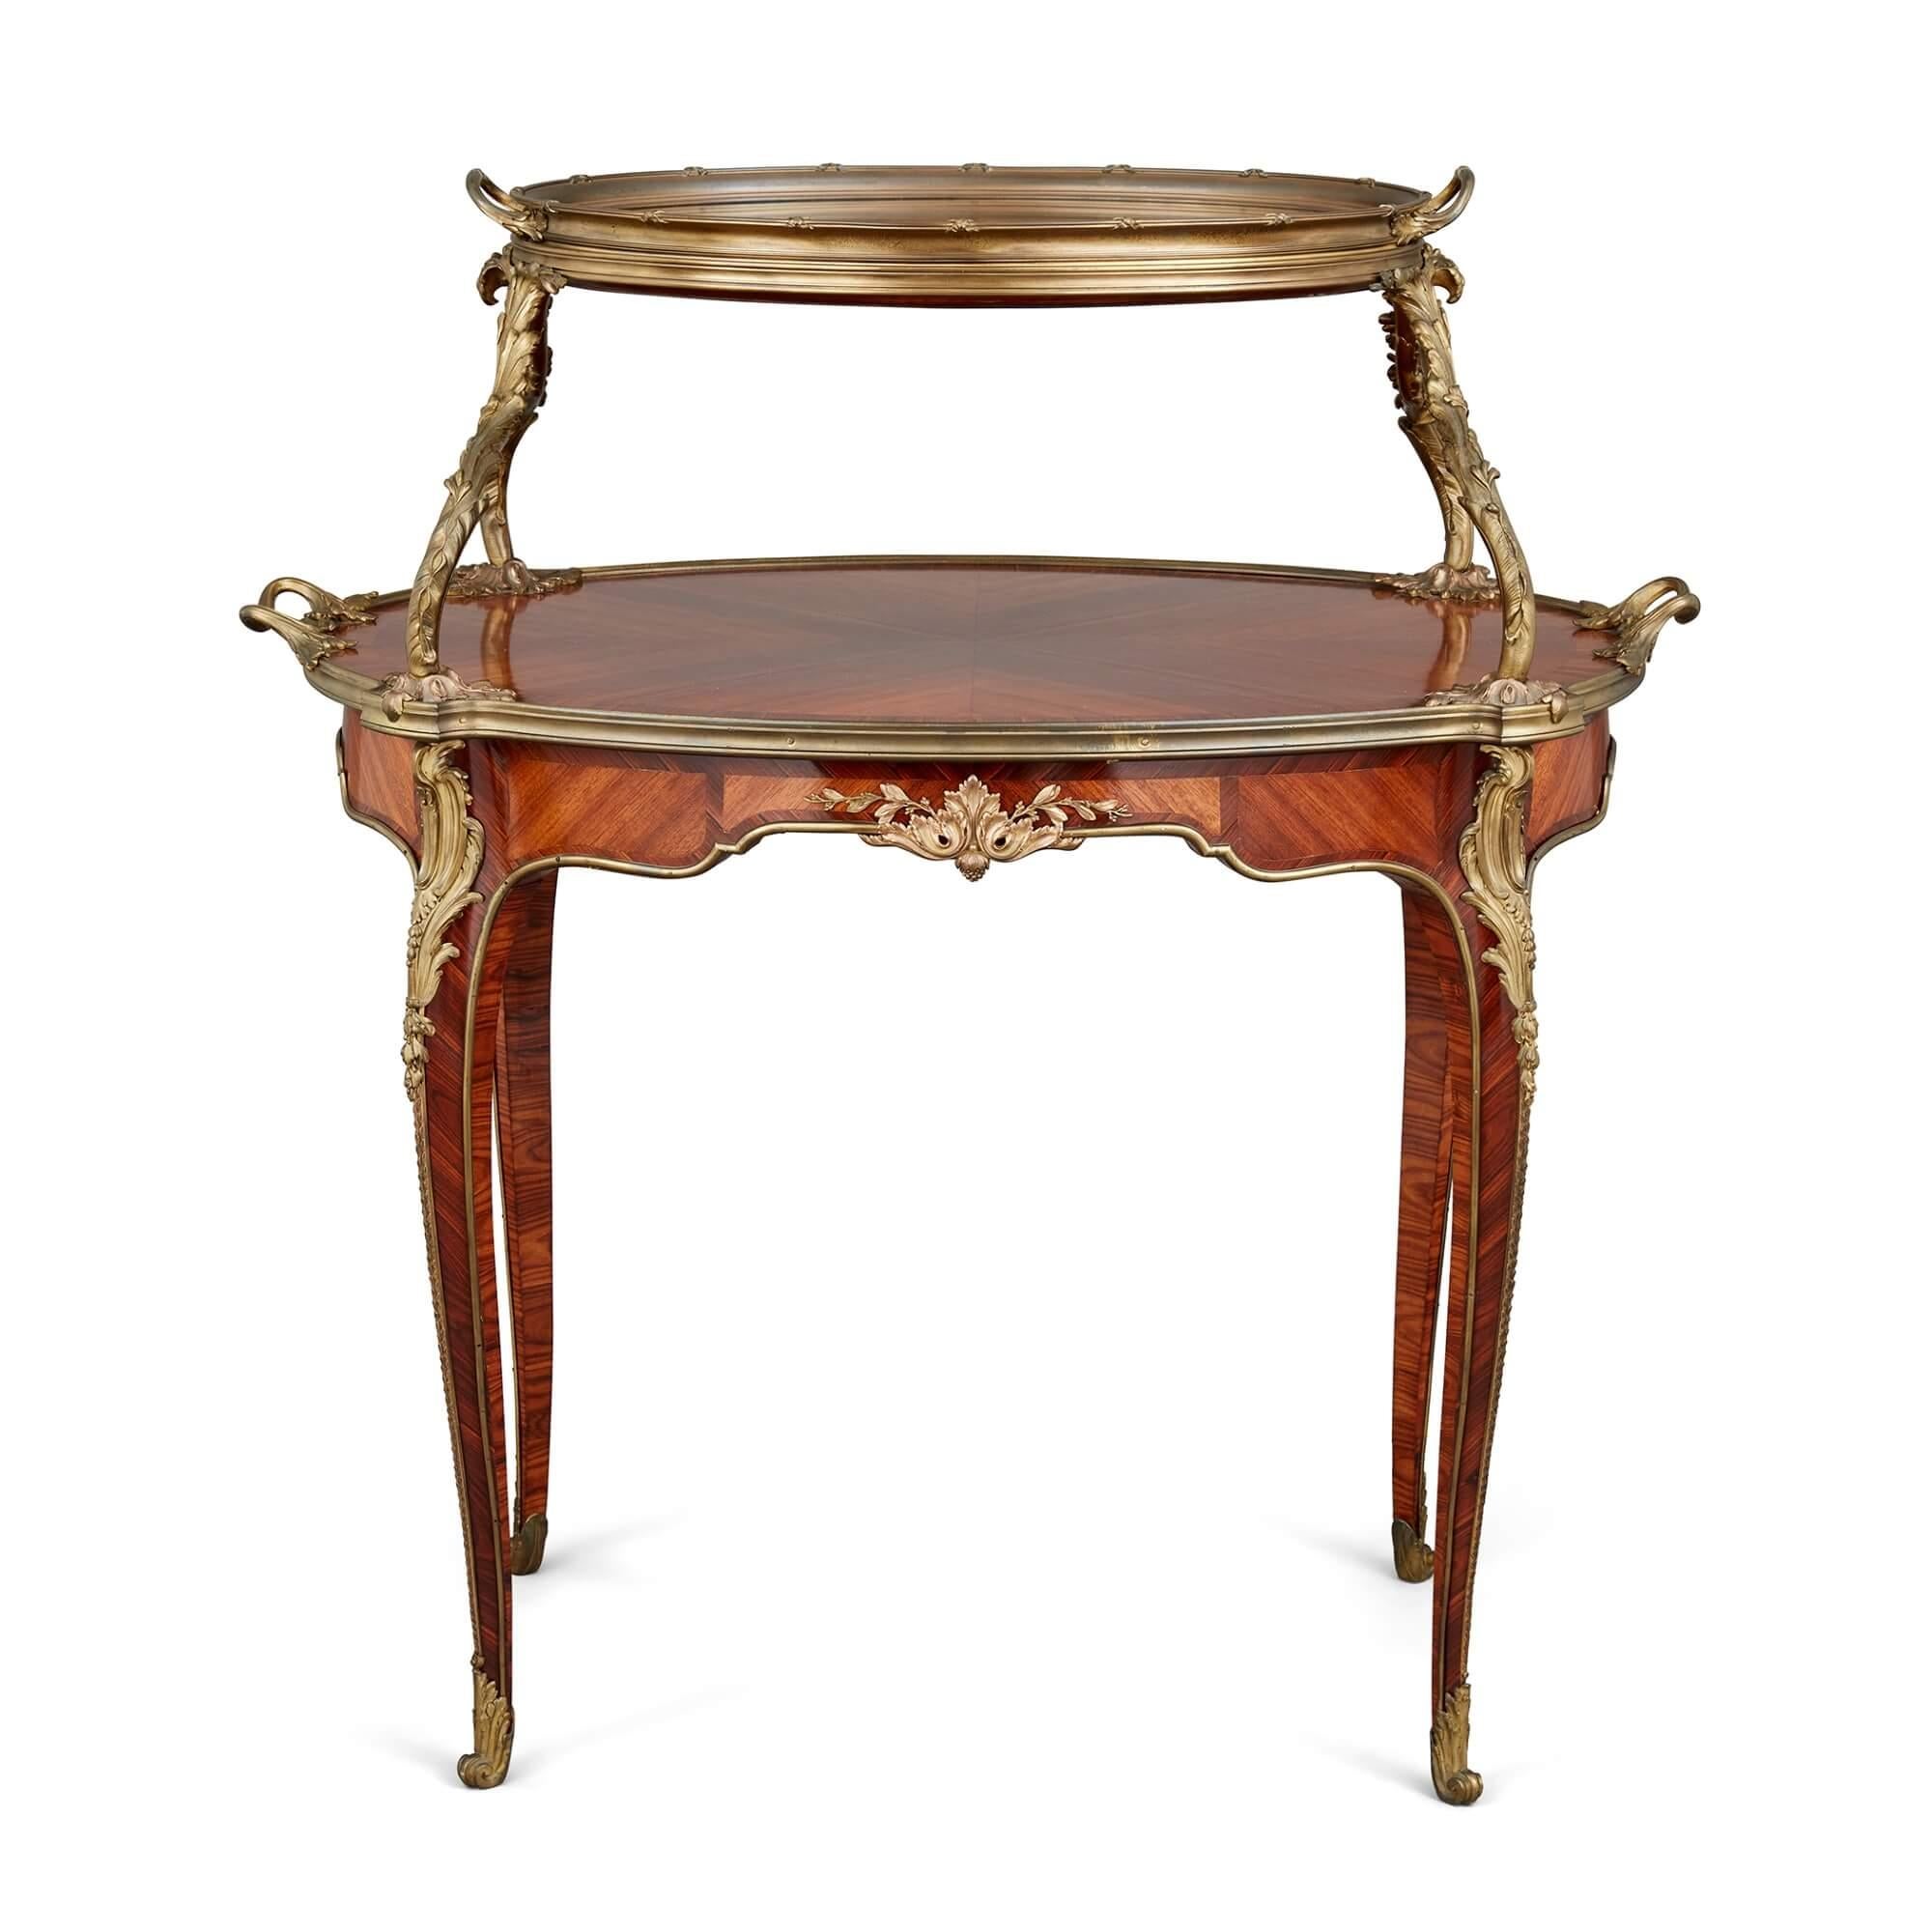 Rococo Antique Ormolu Mounted Tea Table Attributed to Paul Sormani For Sale